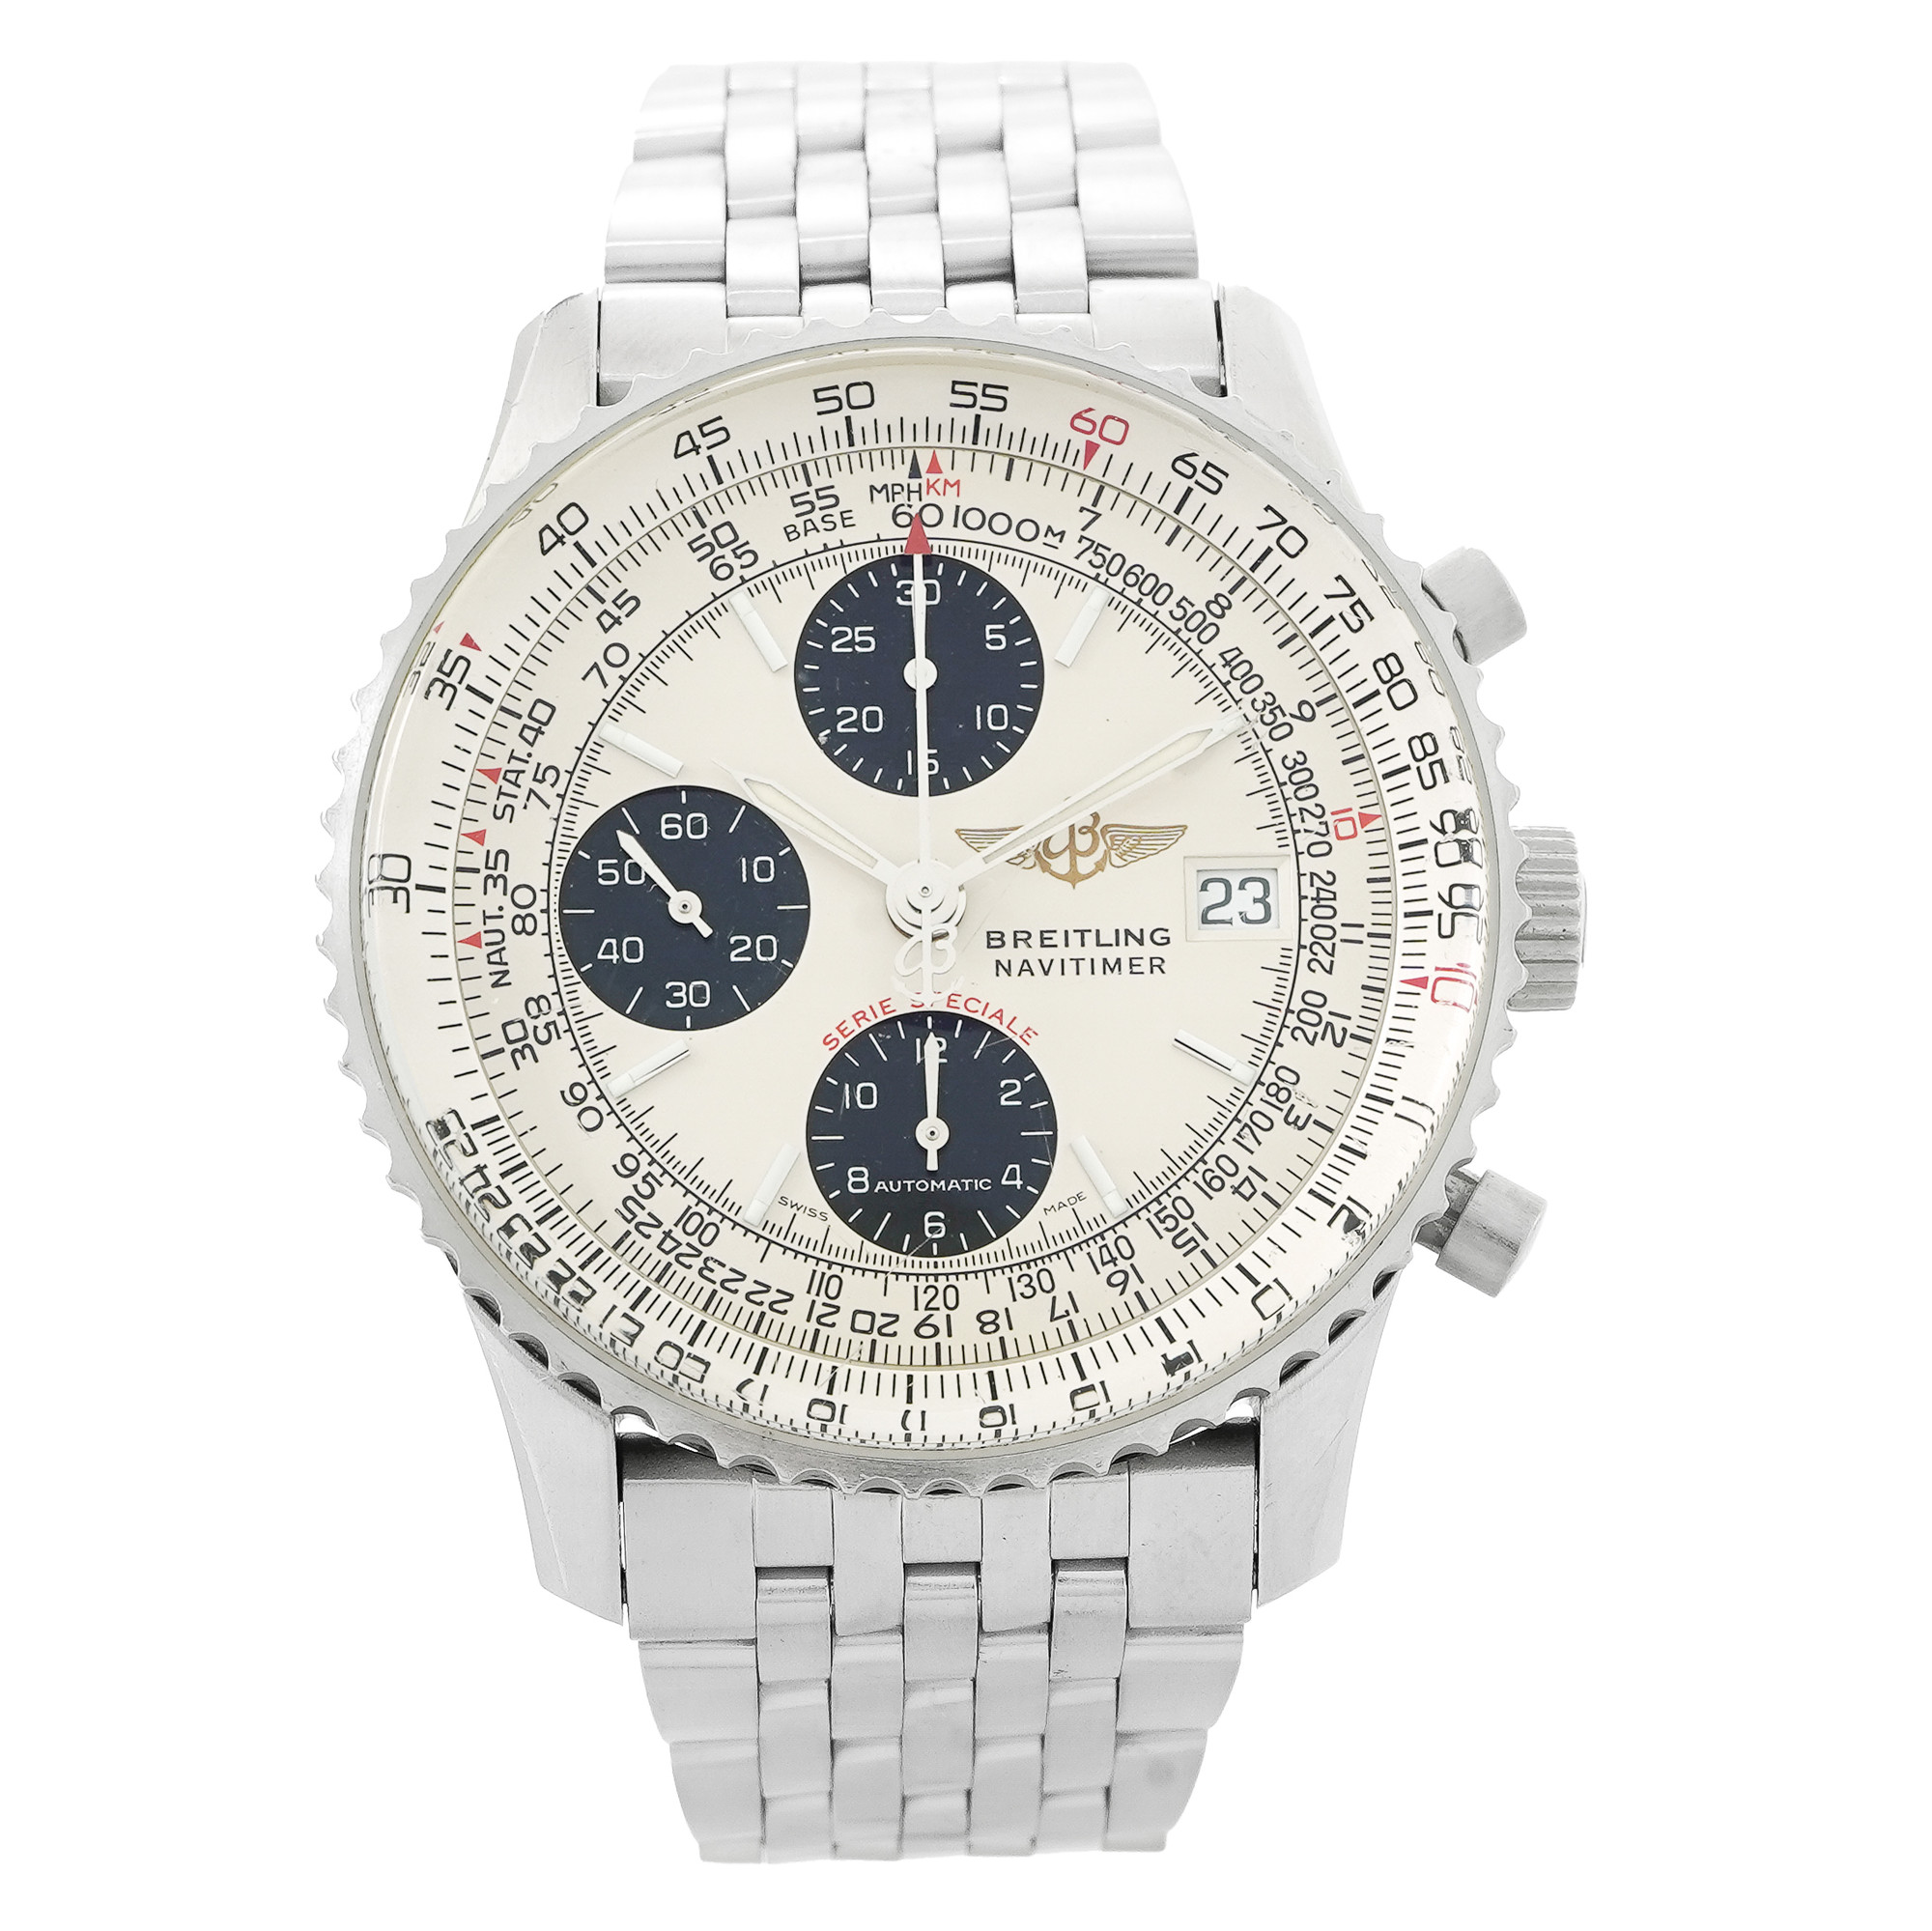 Breitling Navitimer Fighters Chronograph A13330 - Inventory 5565